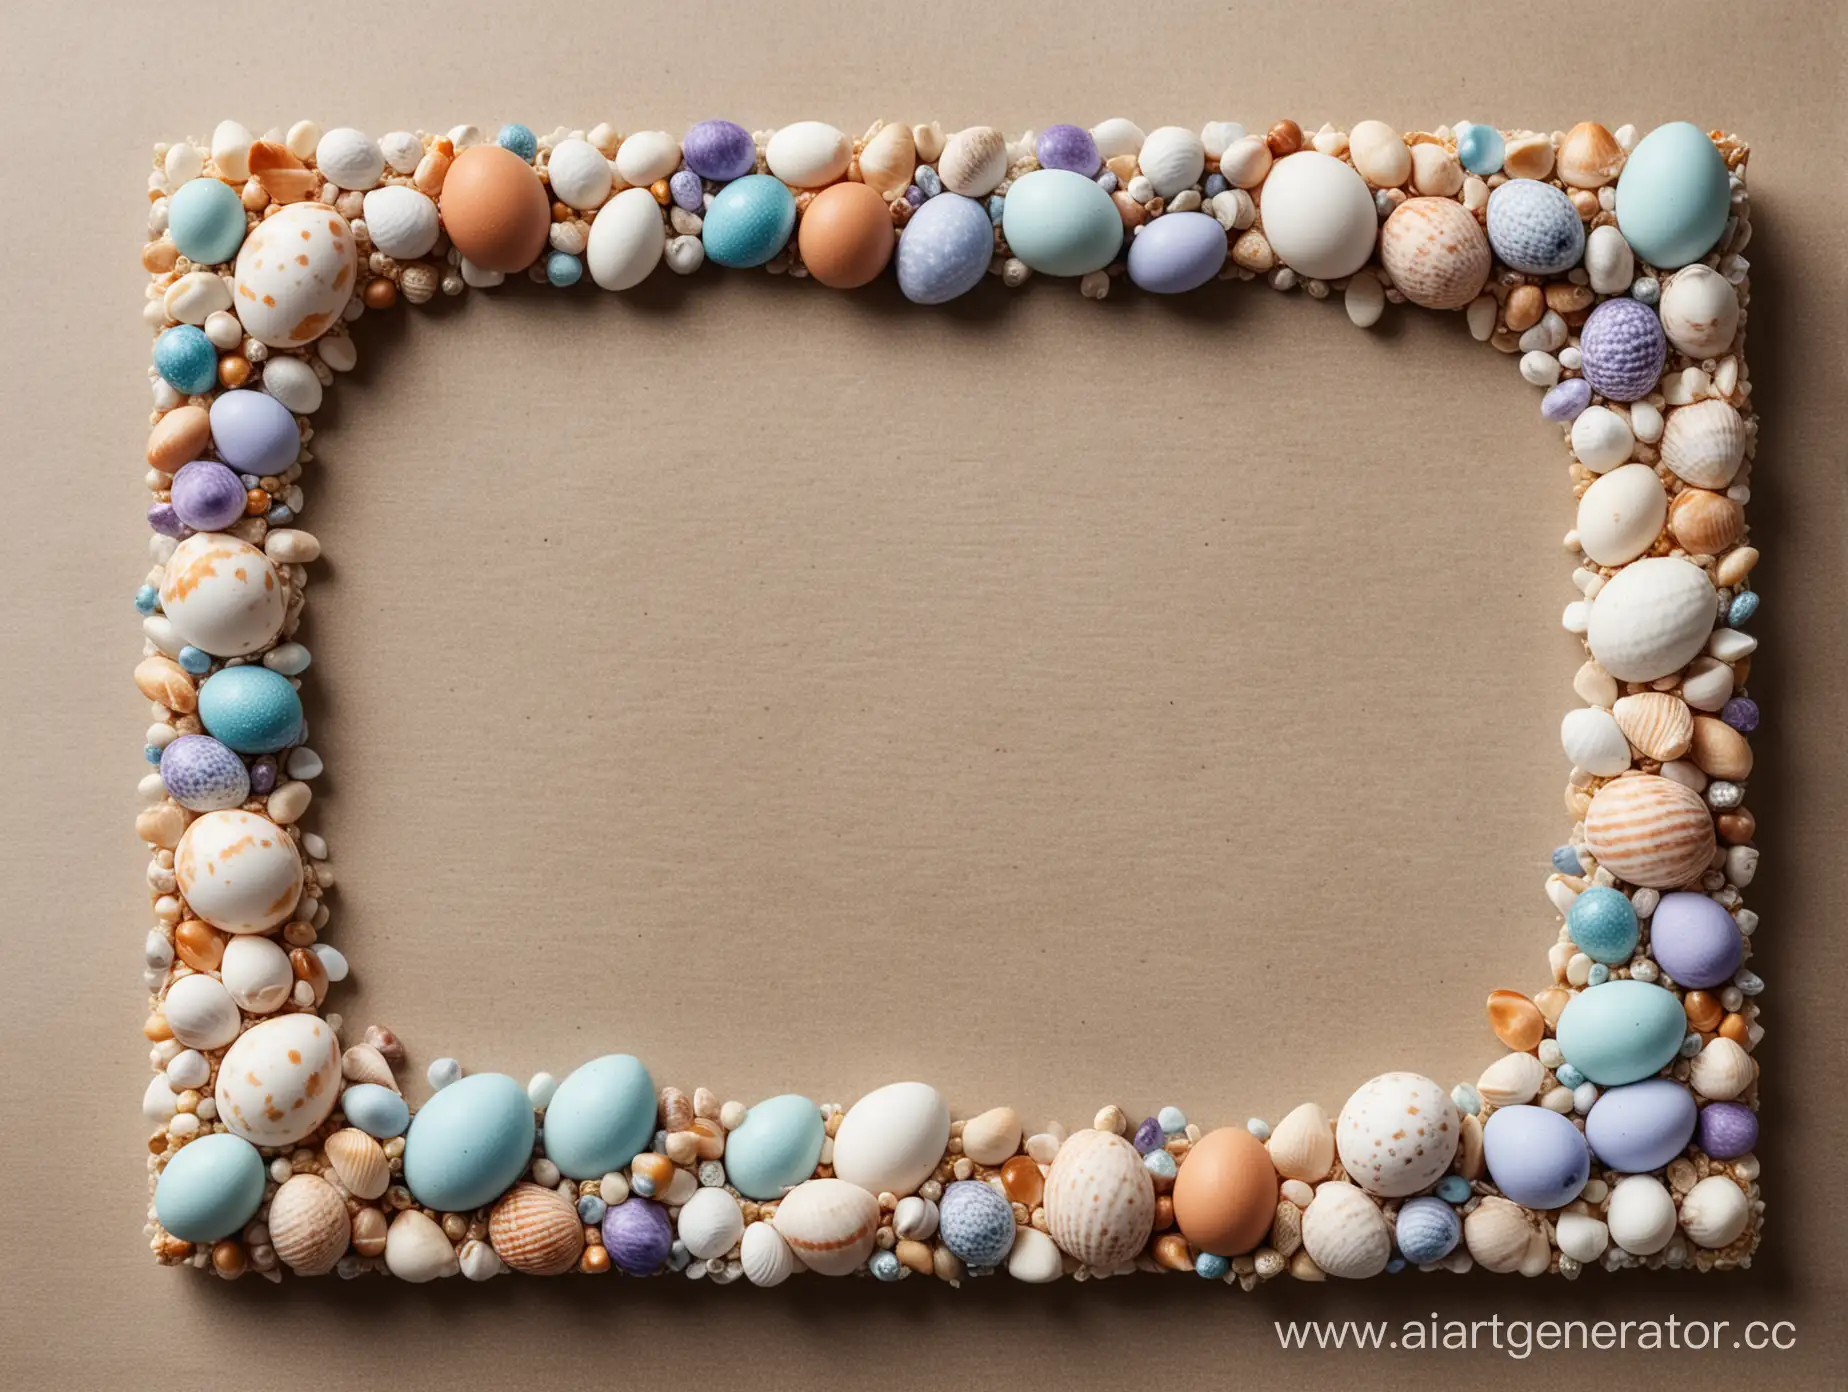 Seashell-and-Easter-Egg-Frame-Coastal-Decor-with-Small-Easter-Eggs-and-Ocean-Gems